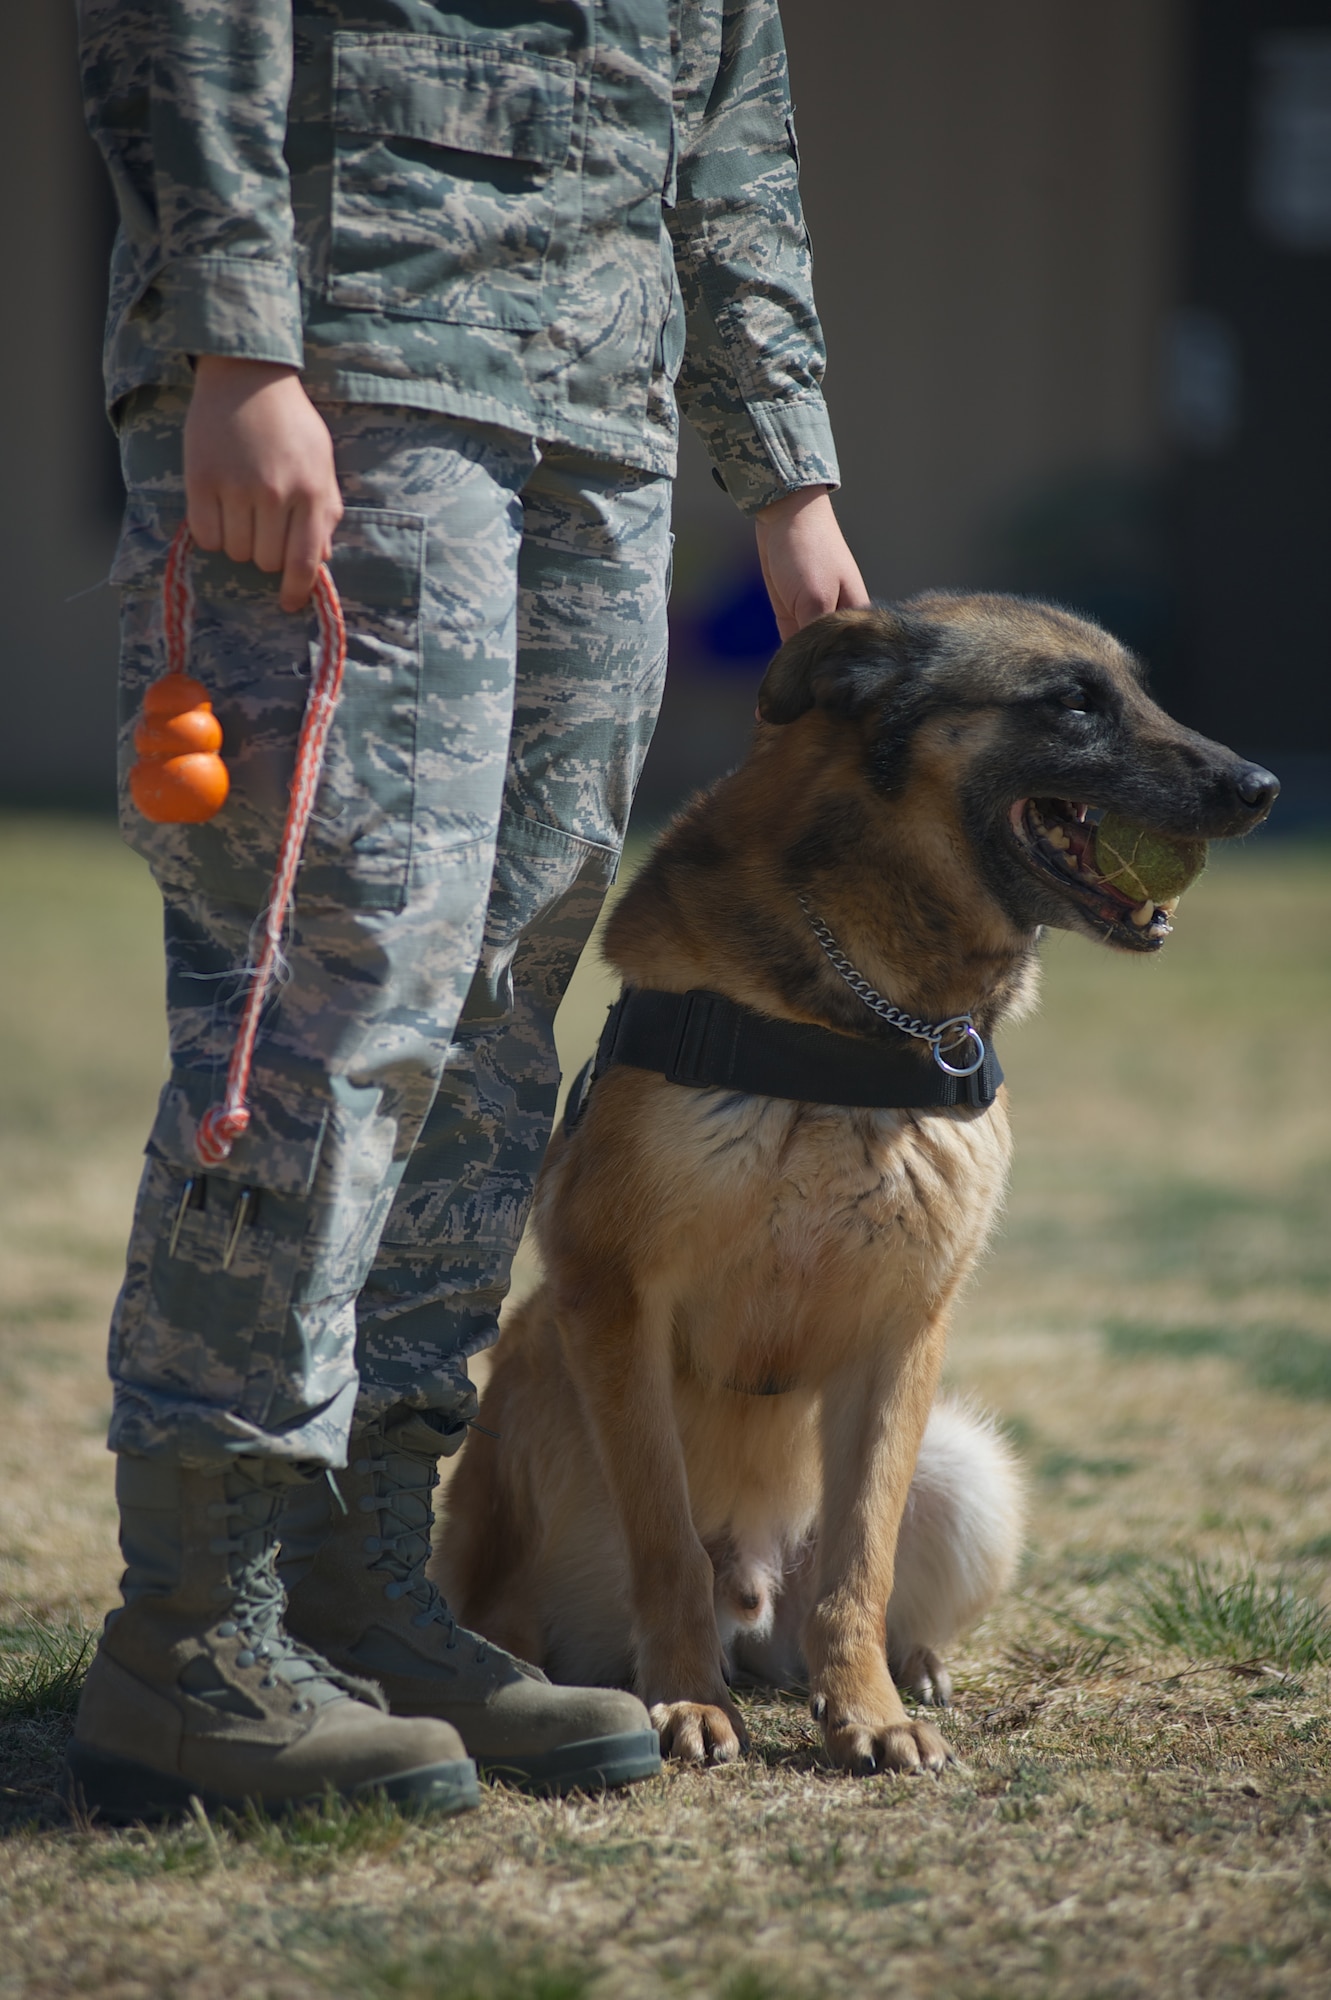 U.S. Air Force 2nd. Lt. Karrissa Garza, 7th Logistics Readiness Squadron, stands next to military working dog (MWD) Condor March 26, 2013, at the 7th Security Forces Squadron MWD Compound on Dyess Air Force Base Texas. Garza is in the process of adopting Condor upon his retirement from the Air Force and pays frequent visits in order to form a bond with the dog. Condor, an 8 year old belgian malinois, is a veteran of Operation Iraqi Freedom as well as supported the U.S. Secret Service. (U.S. Air Force Photo by Tech. Sgt. Joshua T. Jasper/Released)
